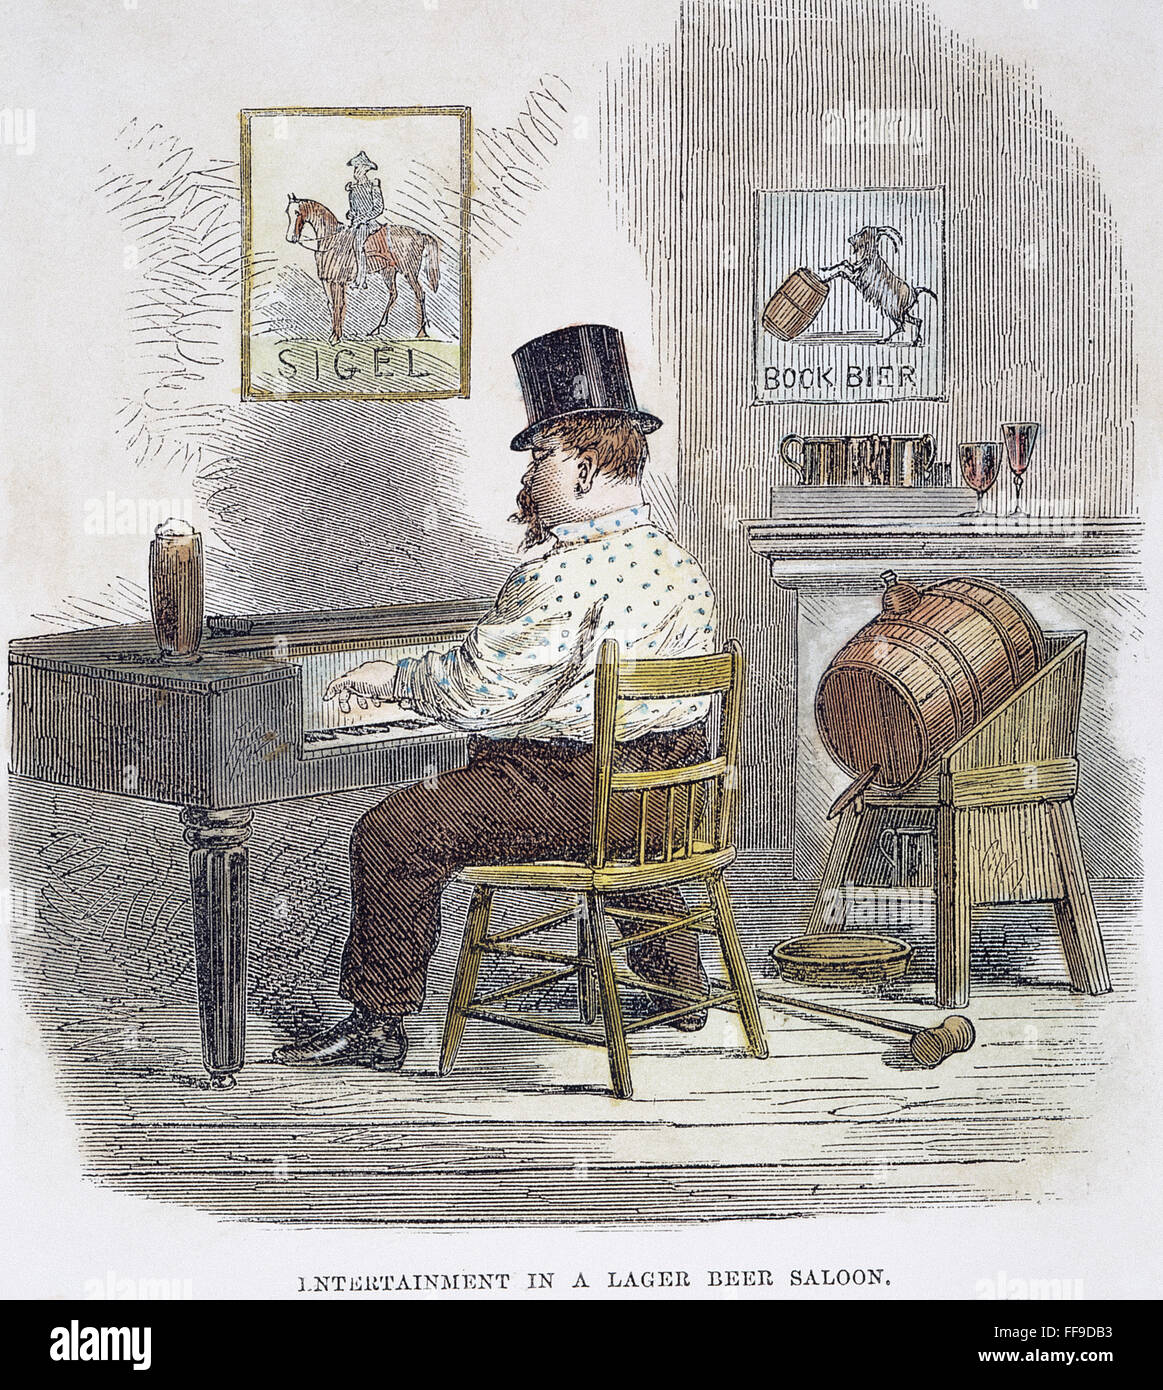 NEW YORK CITY BEER HALL. /nThe piano player in a German beer hall in New York City. Wood engraving, 1864. Stock Photo